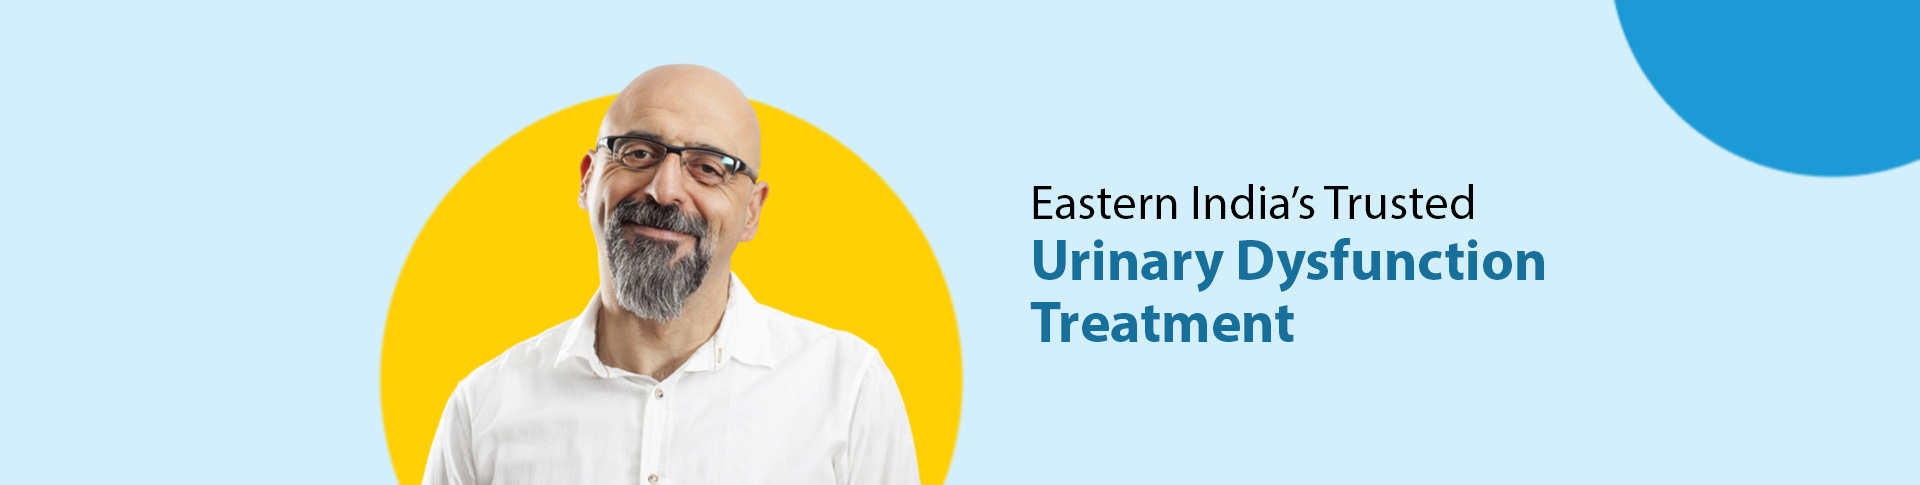 Urinary Dysfunction